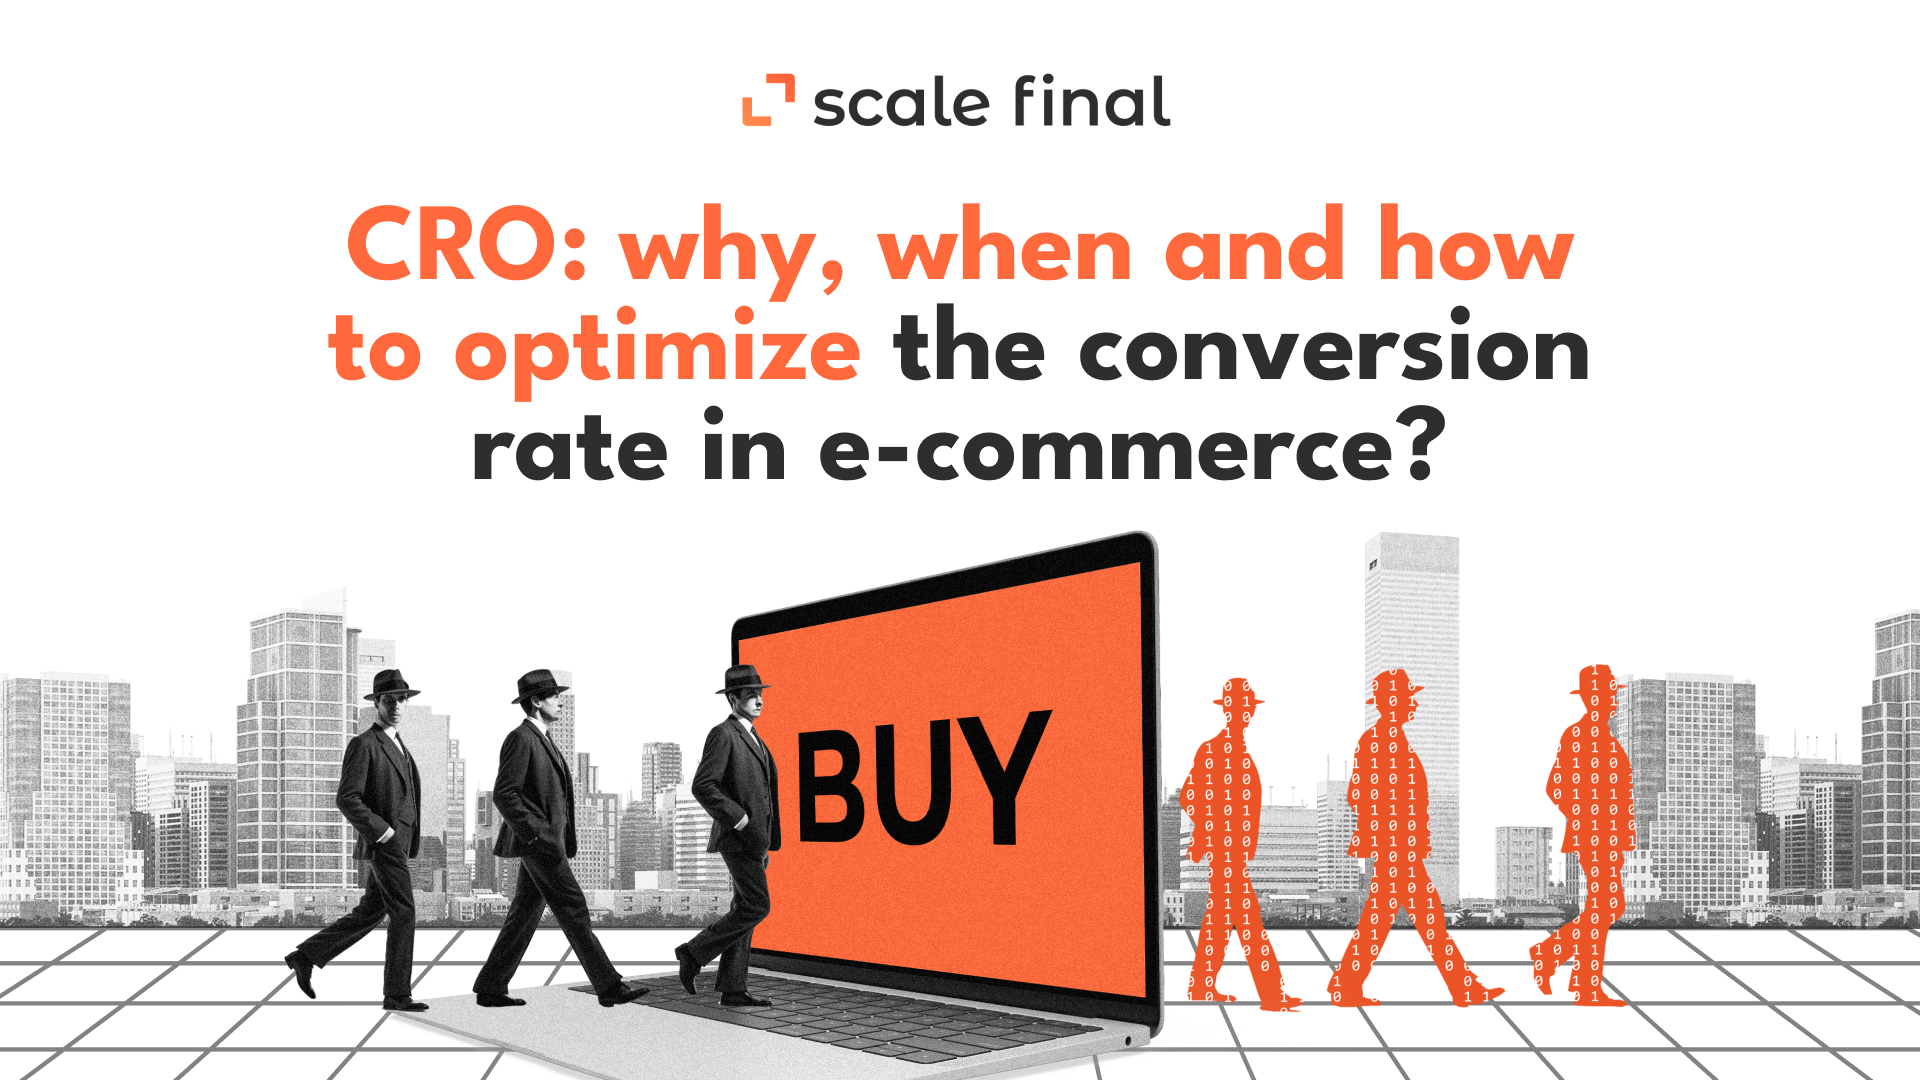 CRO: why, when and how to optimise the conversion rate in e-commerce?